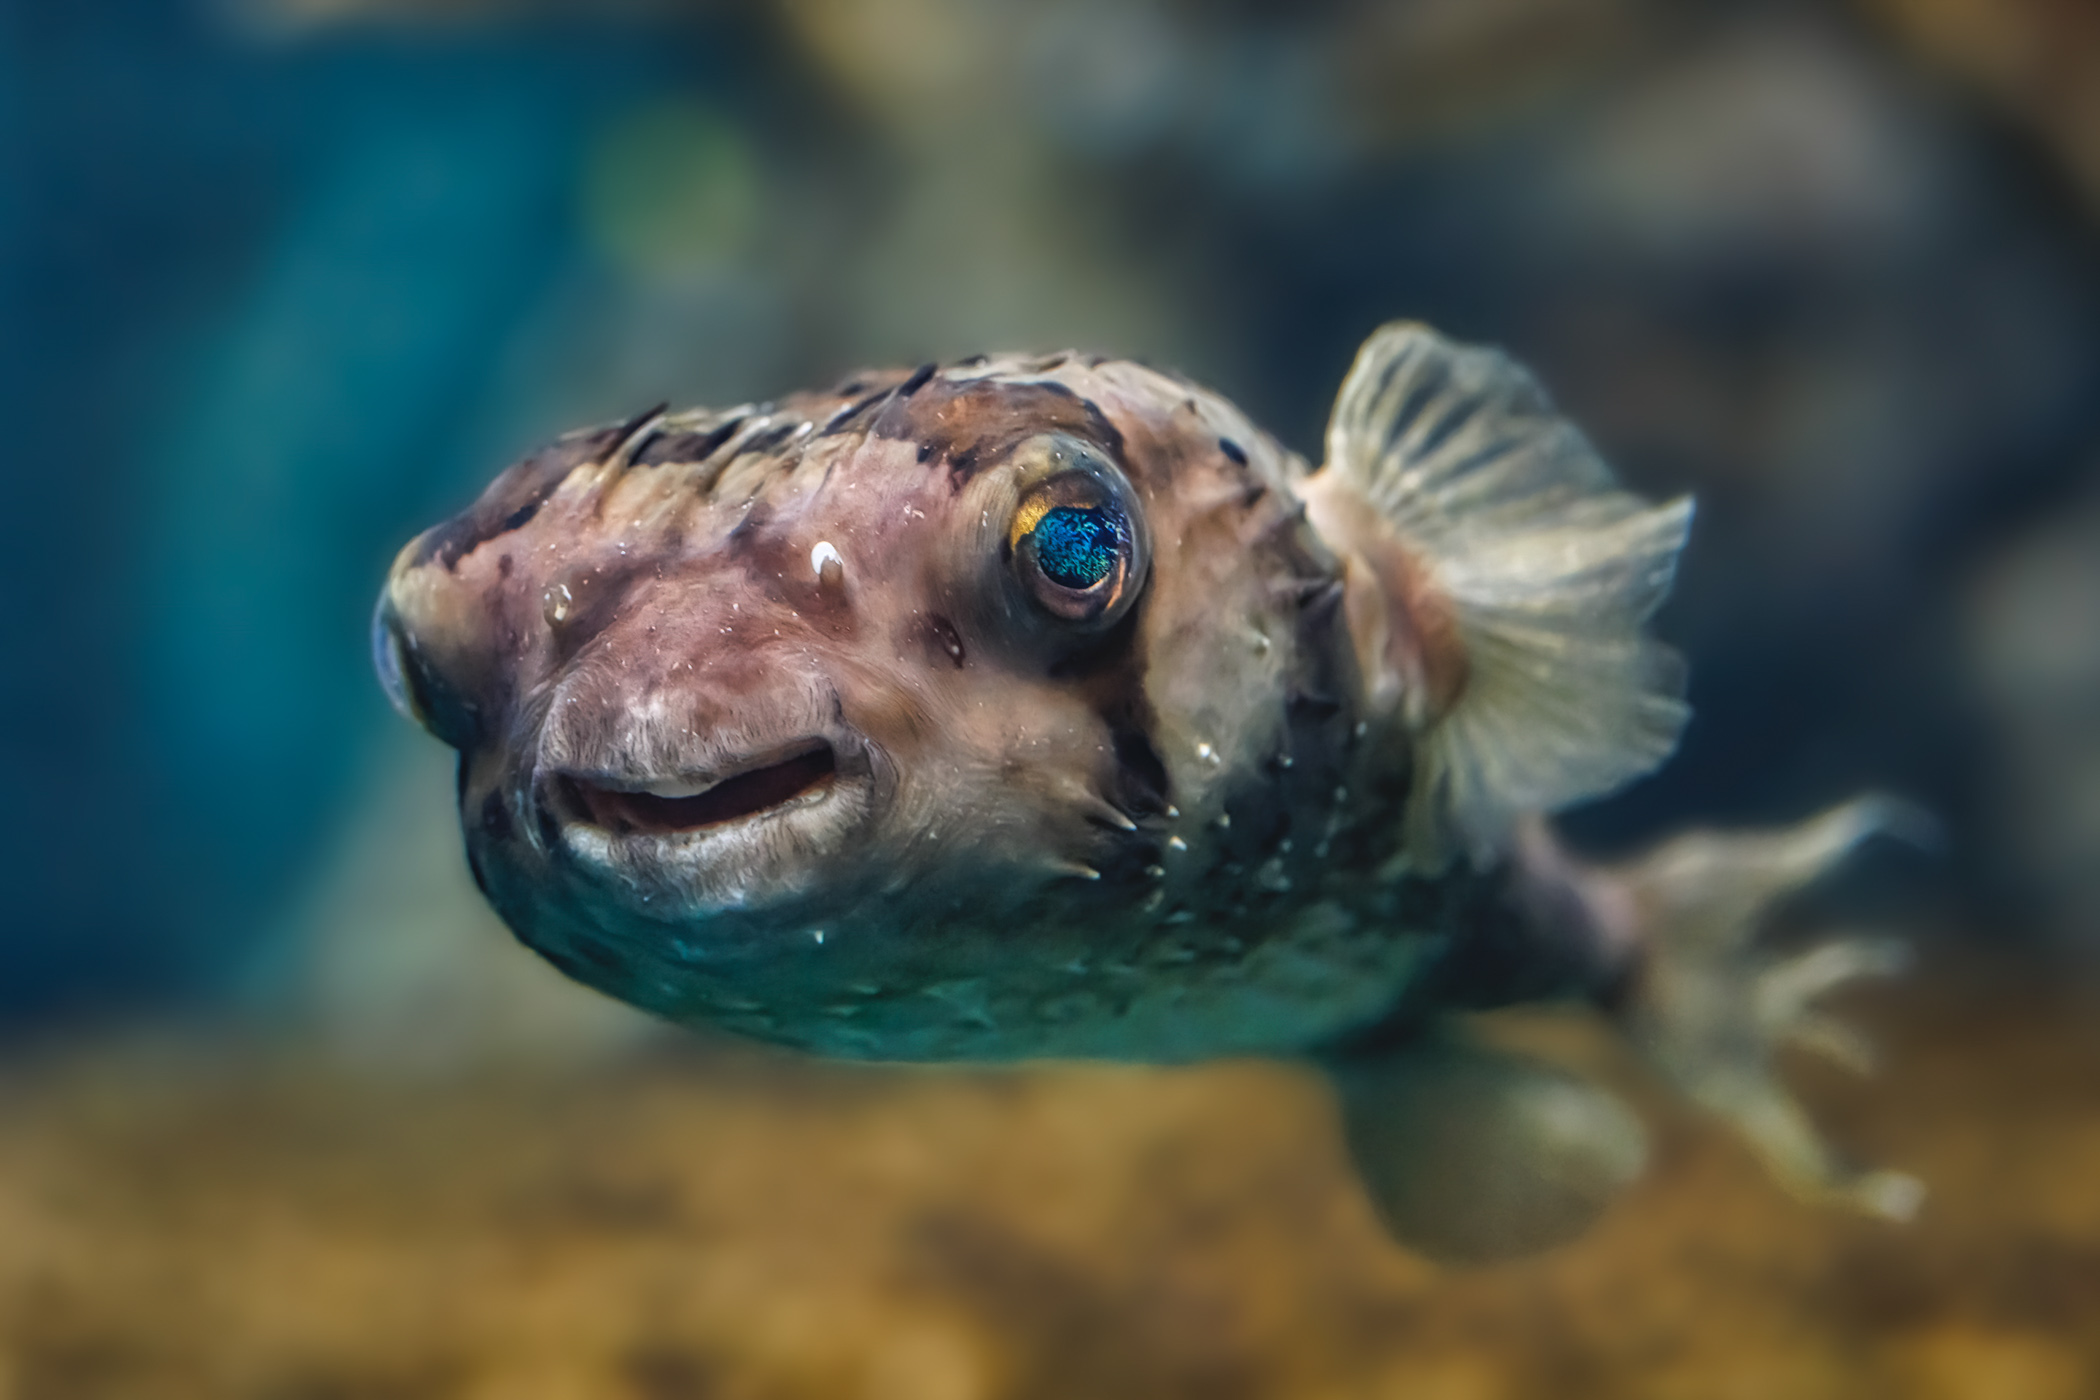 Porcupine fish smiling at the camera.